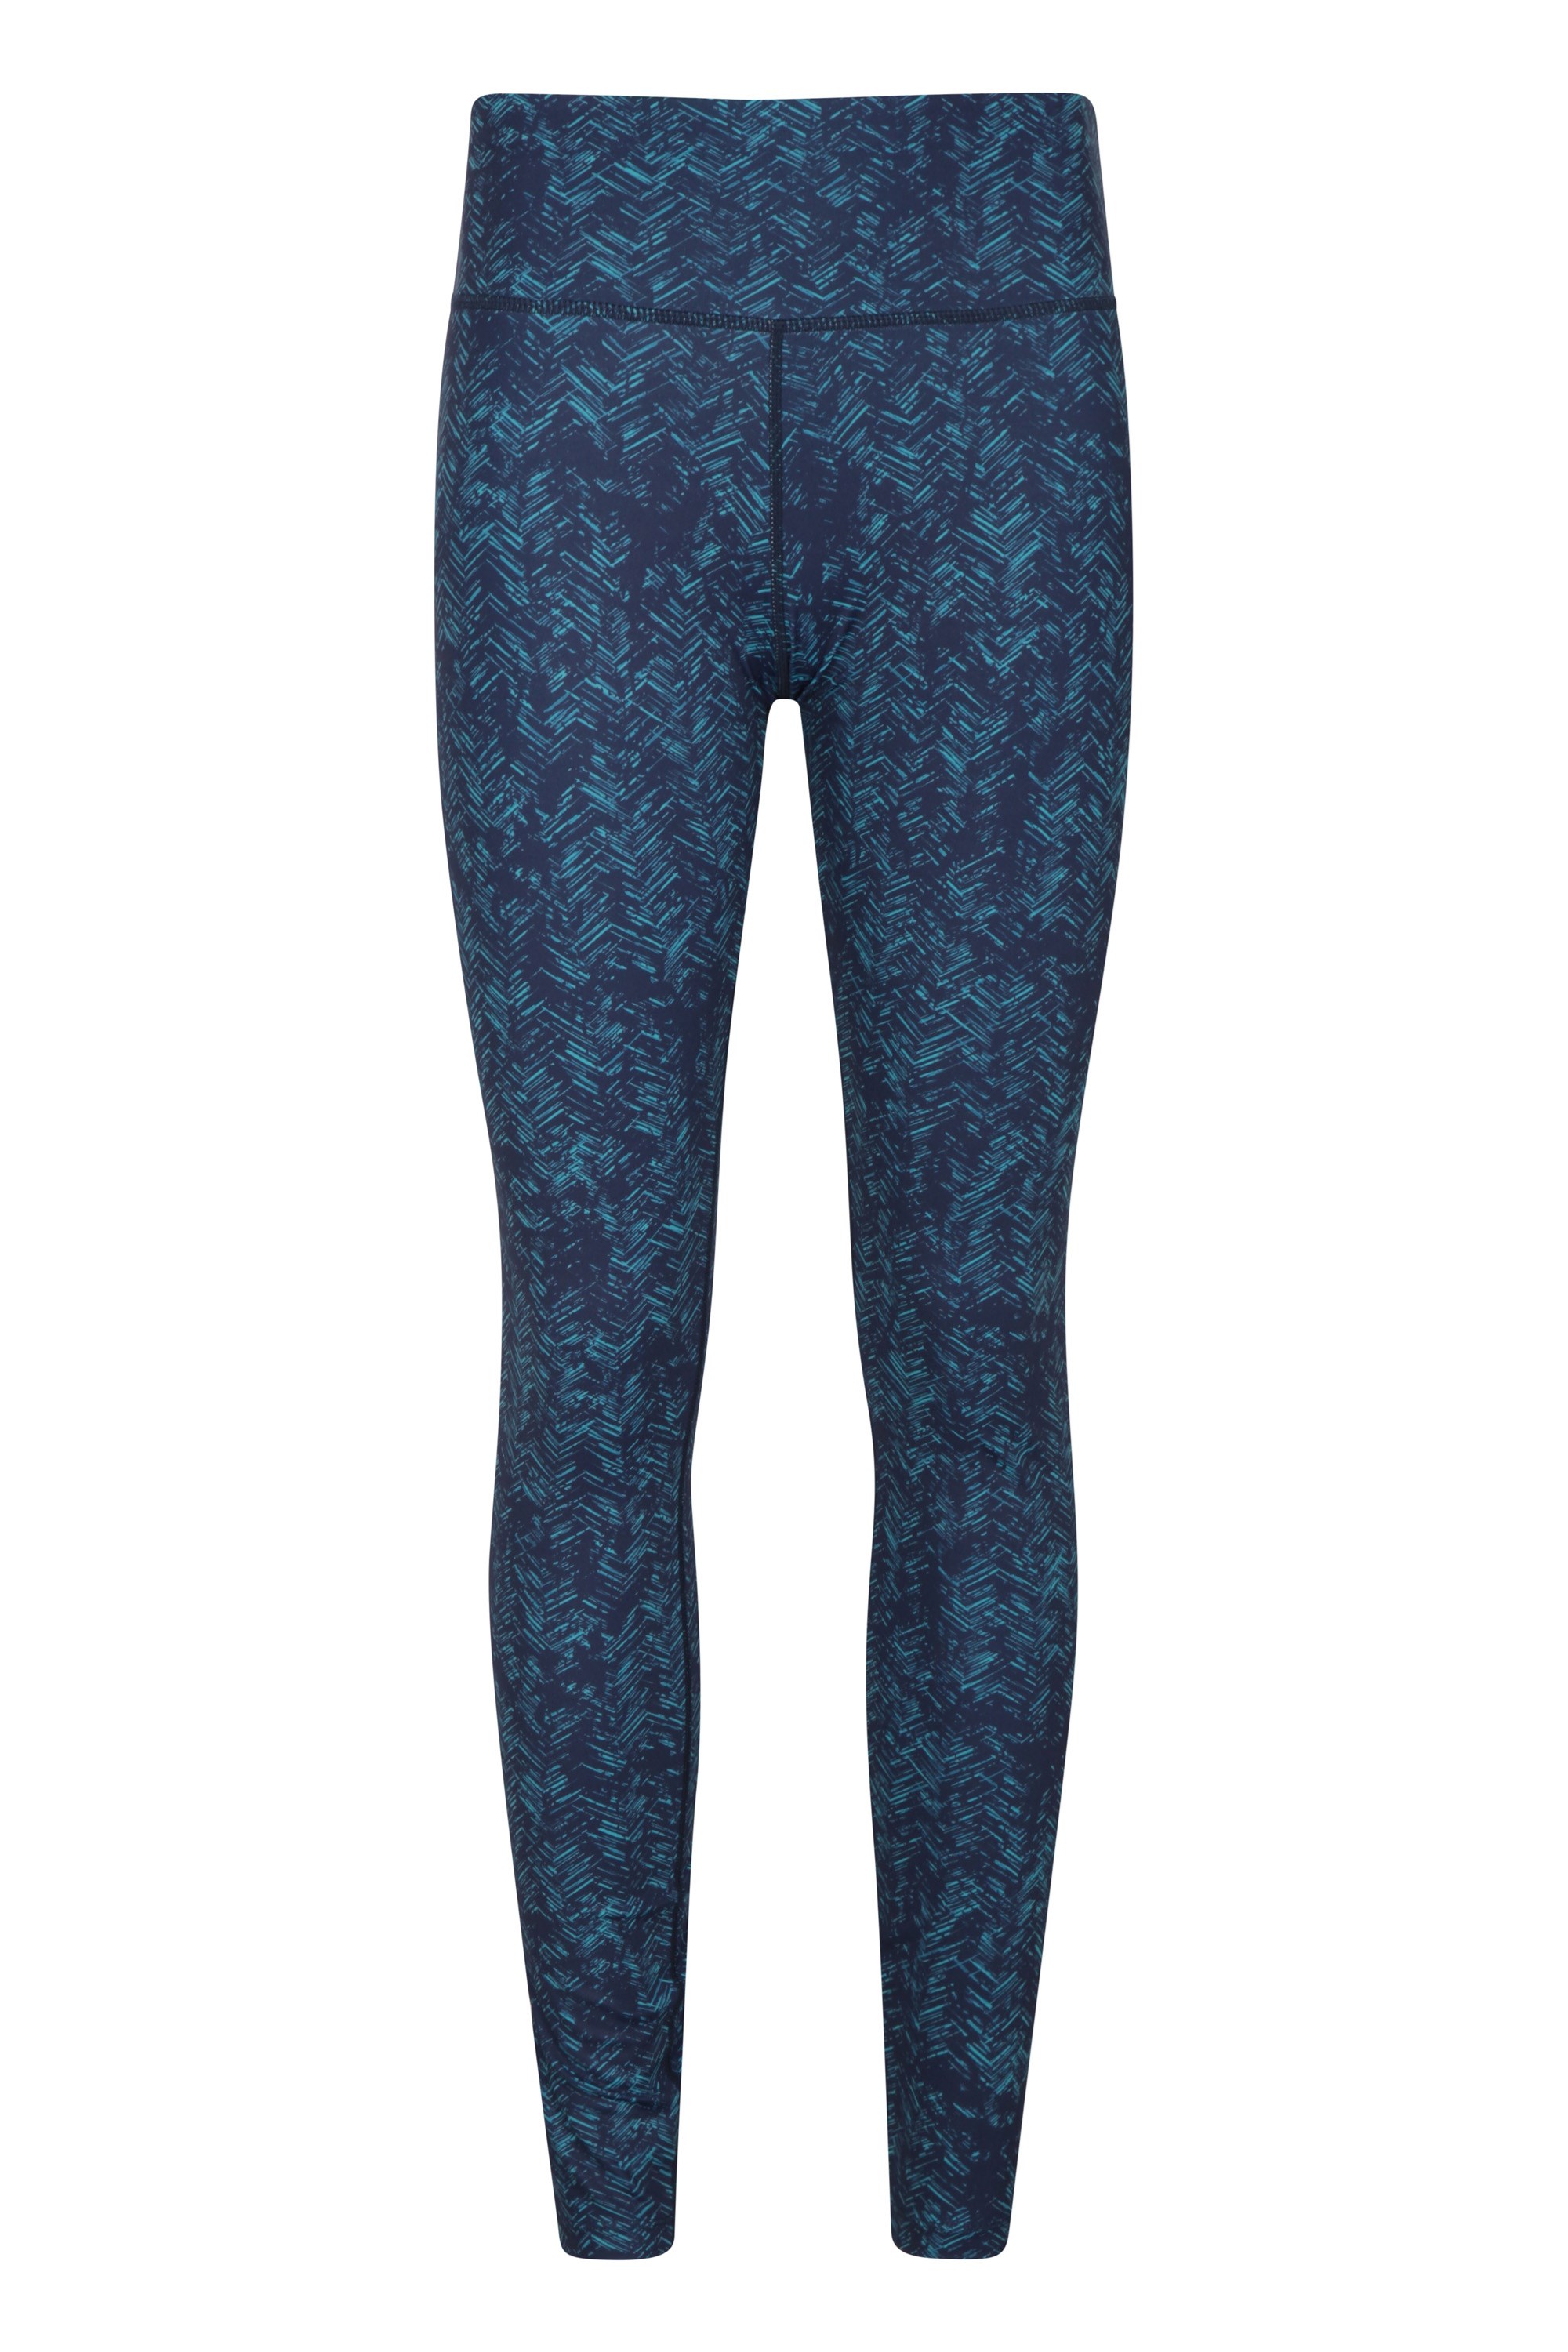 Patterned High-Waisted Womens Tights 